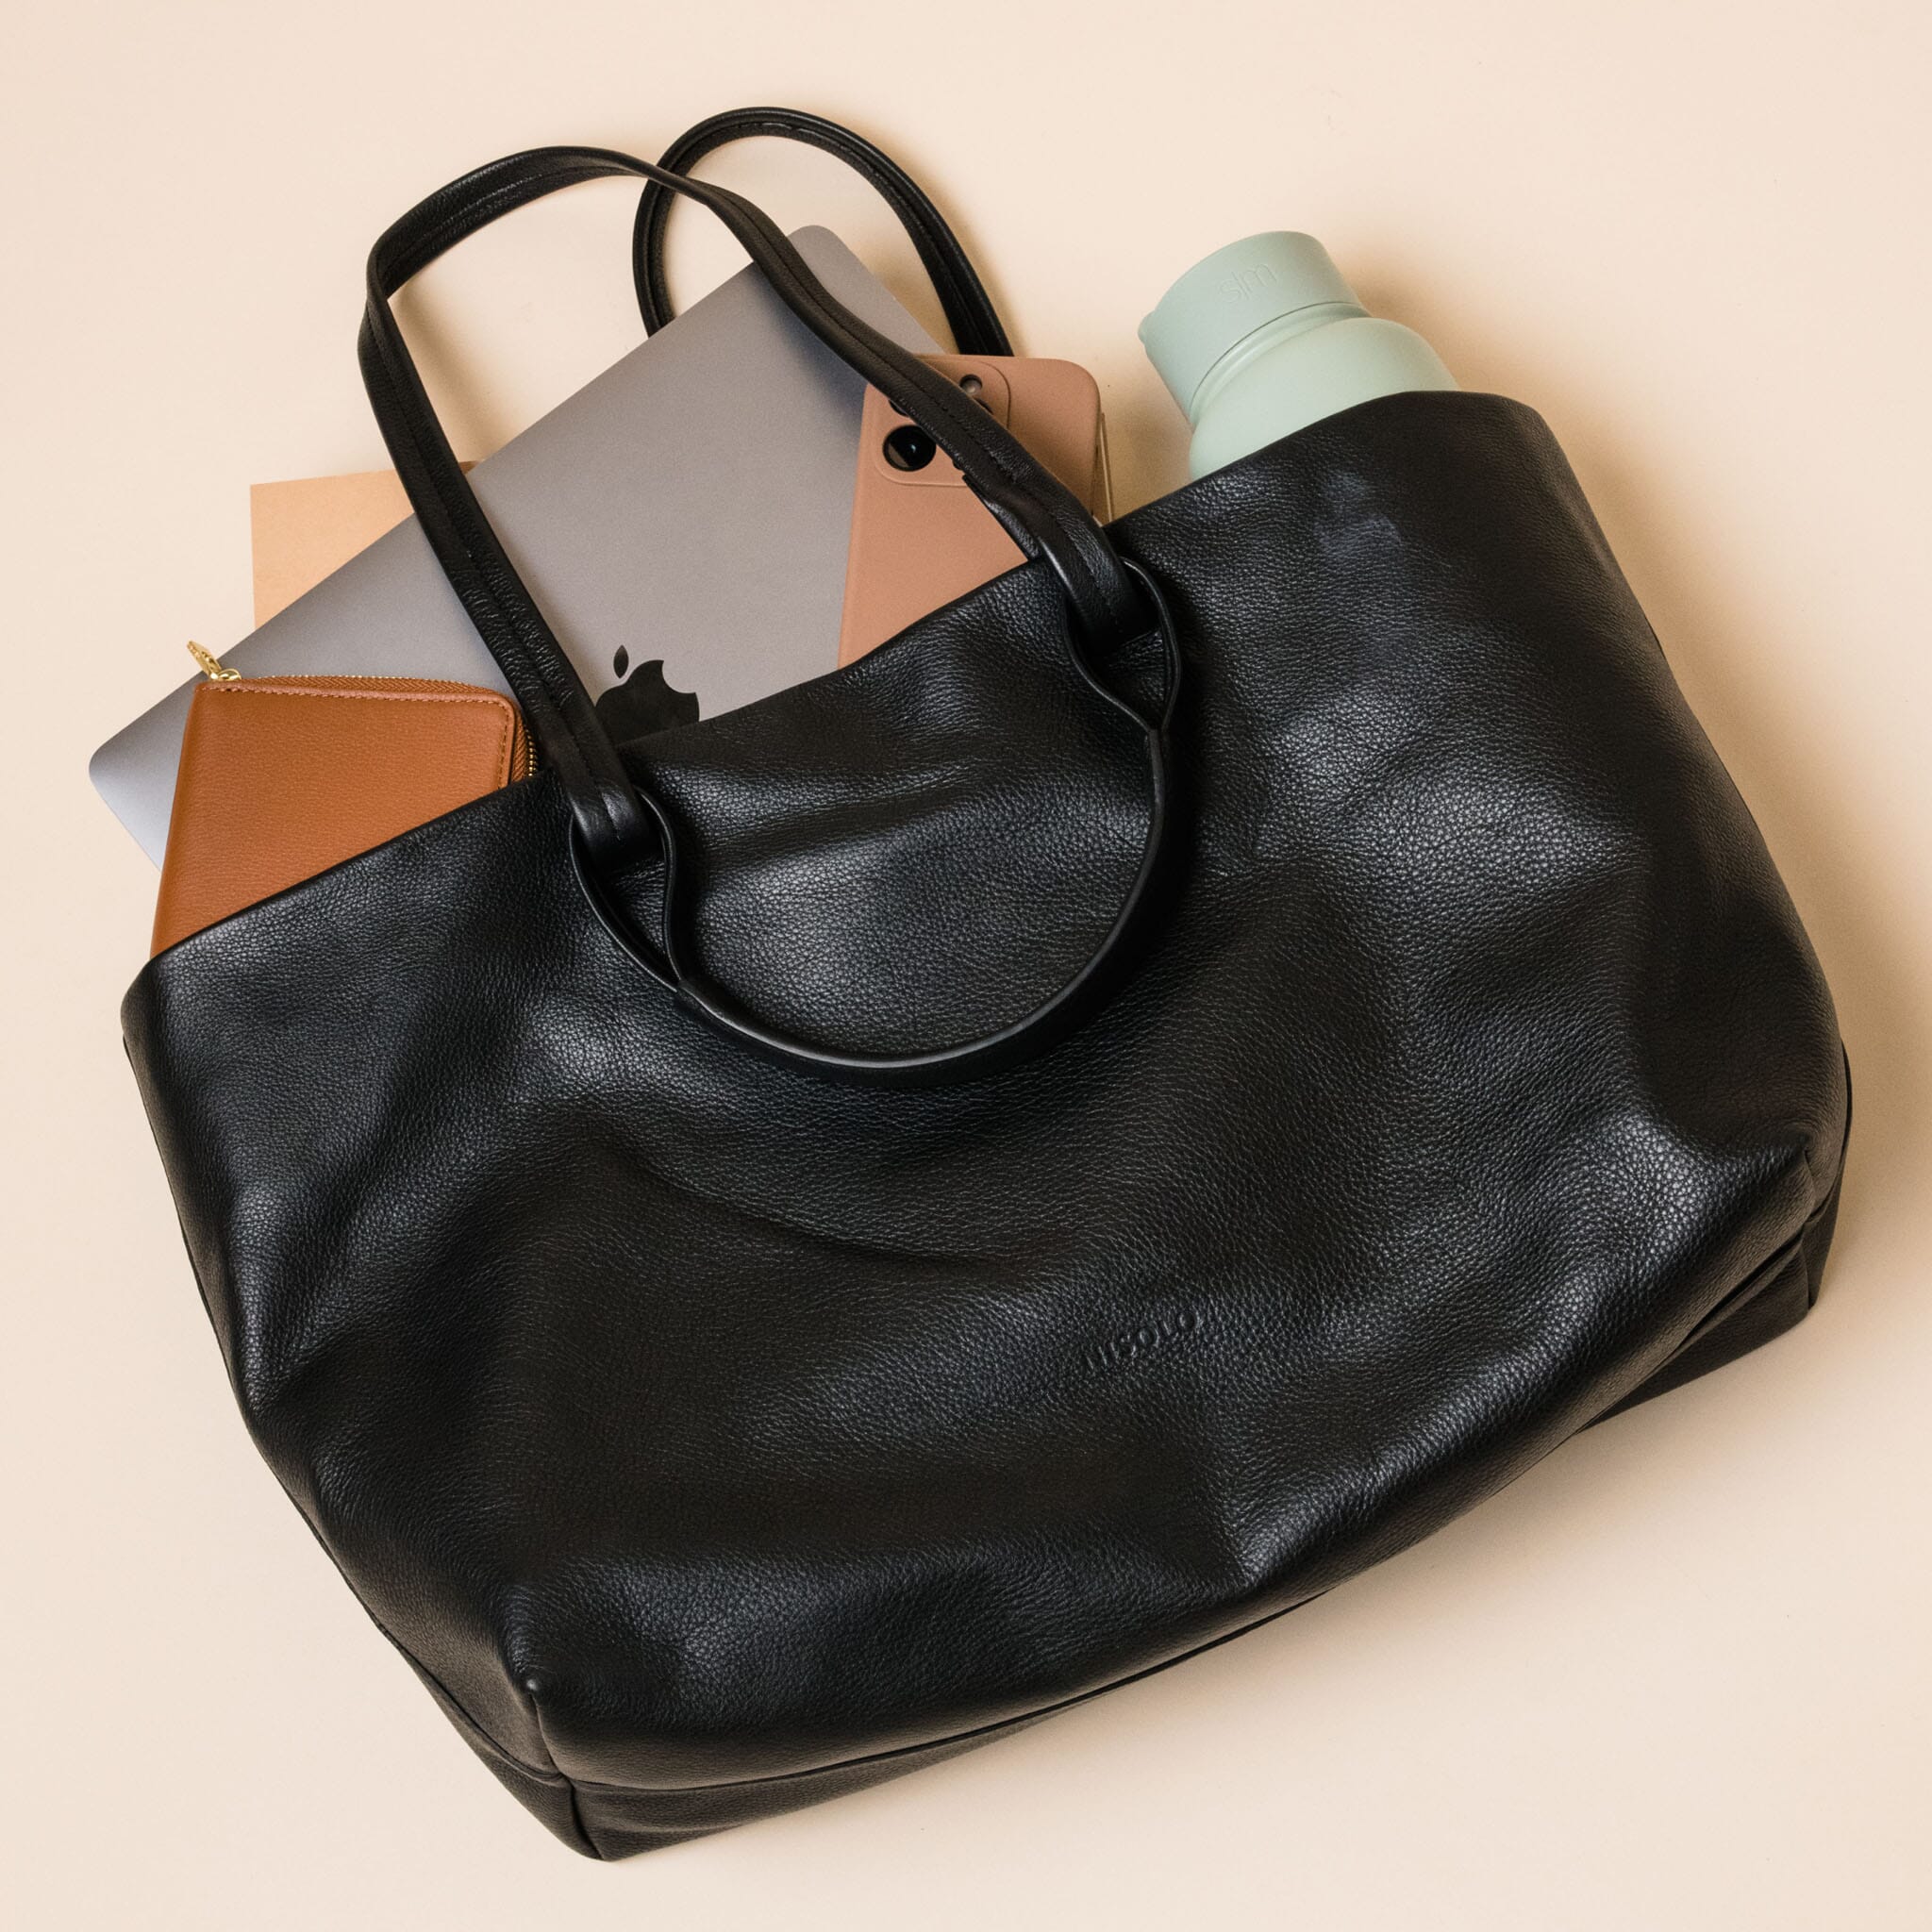 Camila Everyday Tote Black Leather Bag Nisolo 